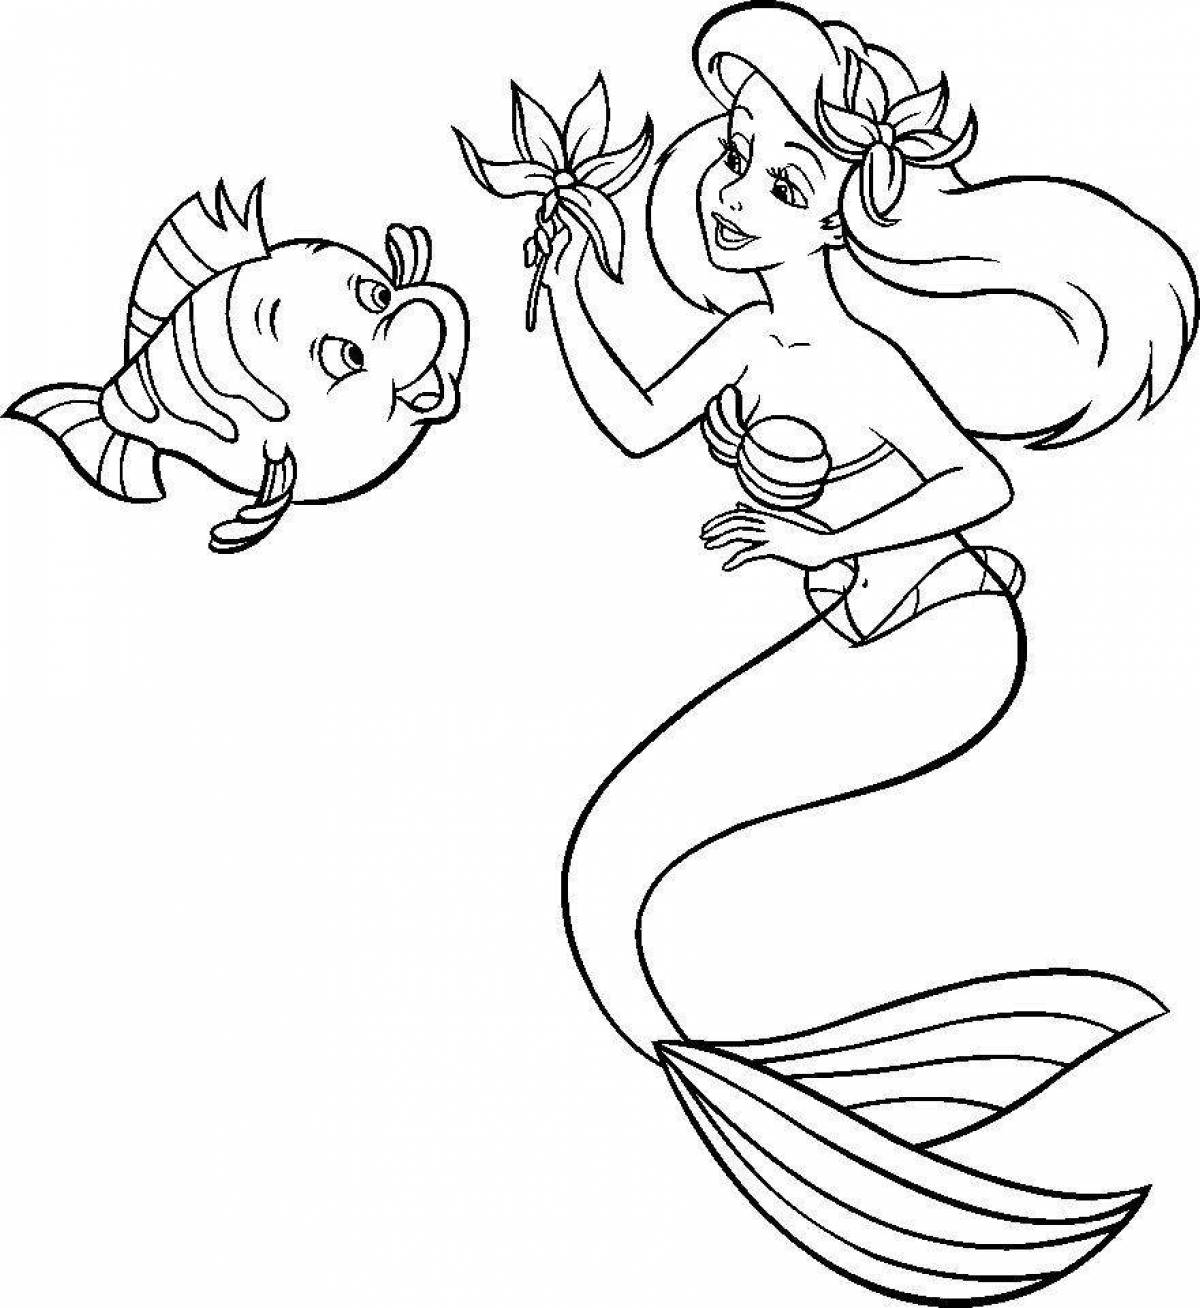 Bright little mermaid coloring page